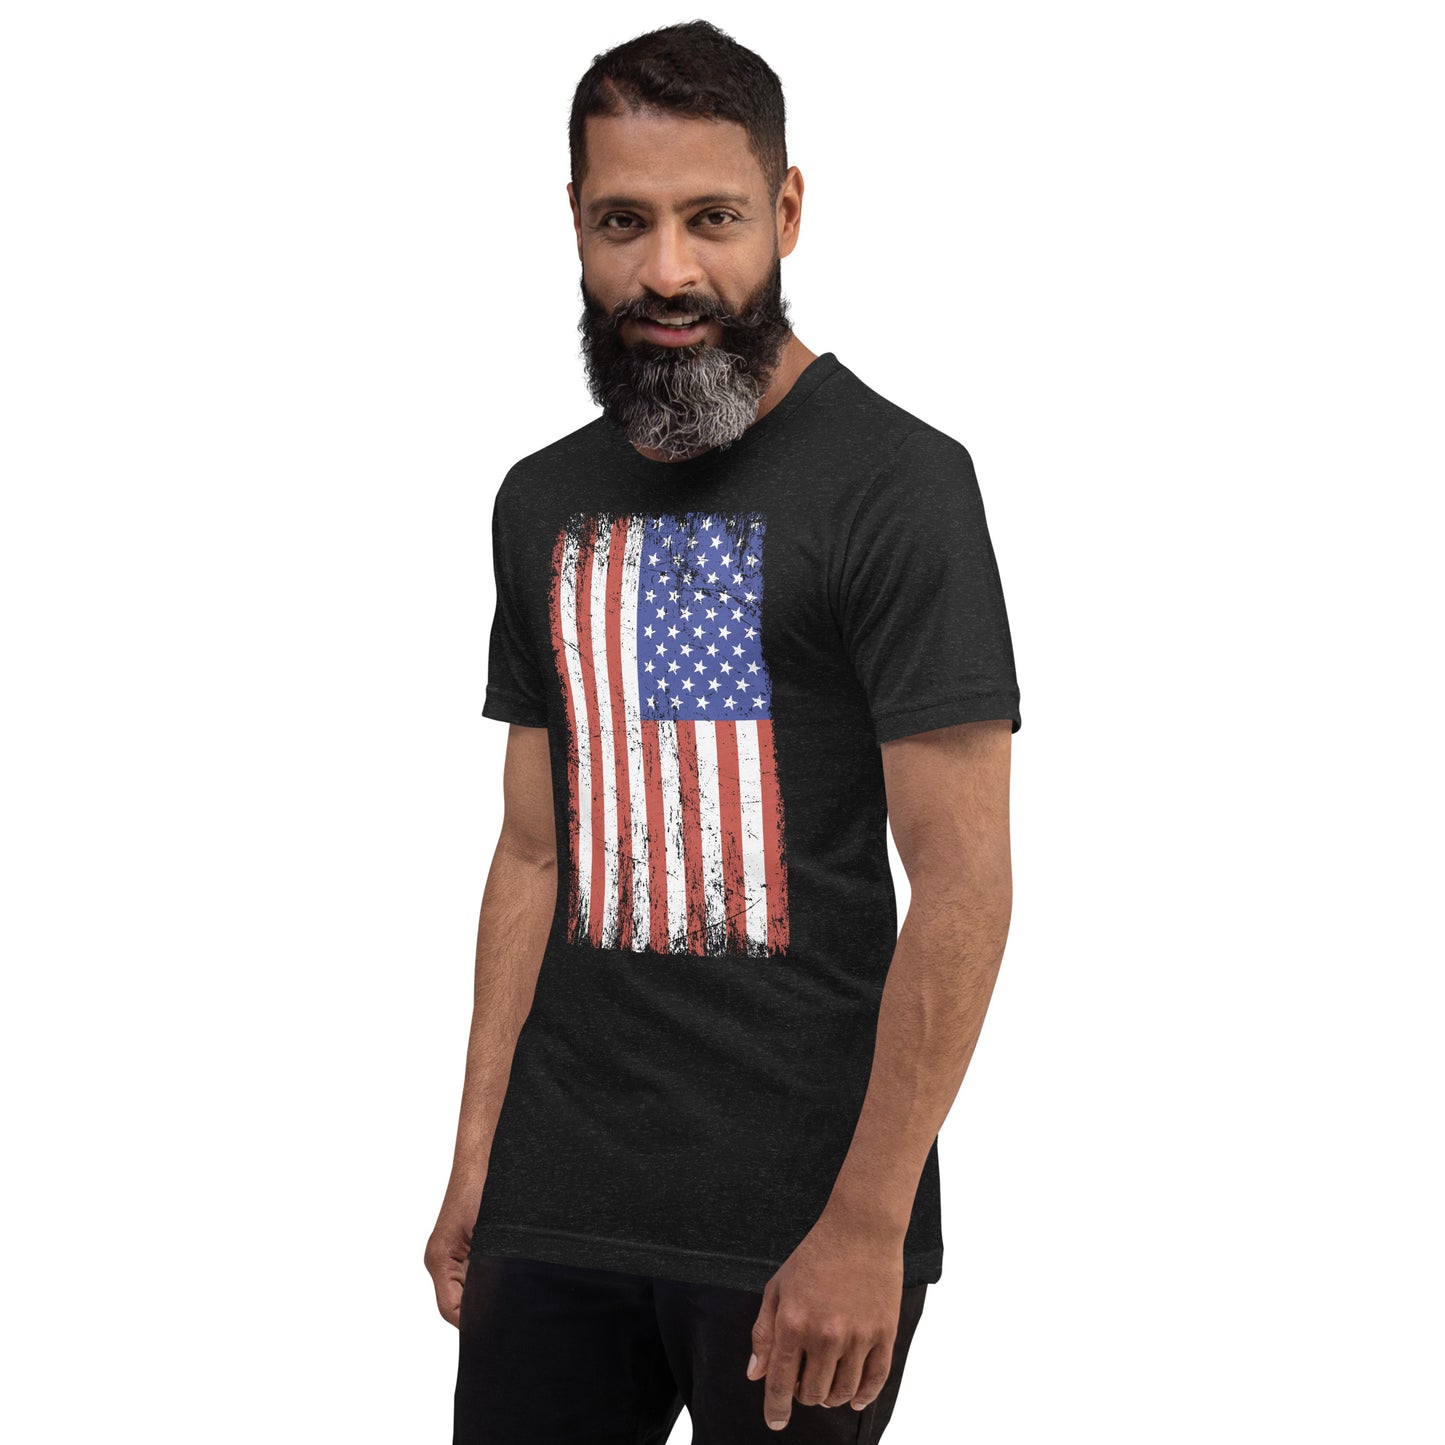 Distressed American Flag Graphic T-Shirt